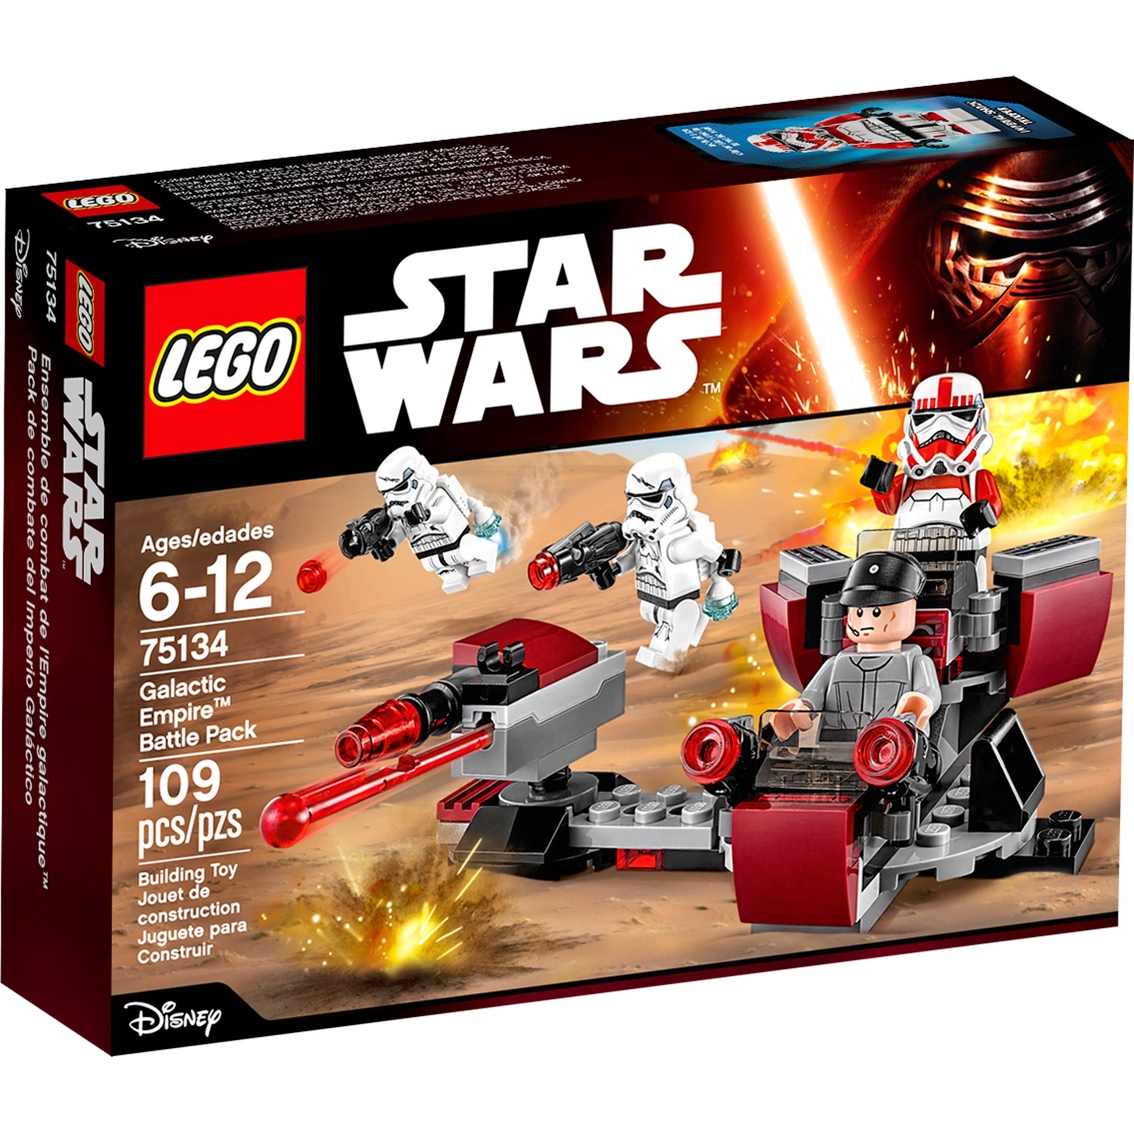 LEGO Star Wars Galactic Empire Battle Pack - Image 3 of 3